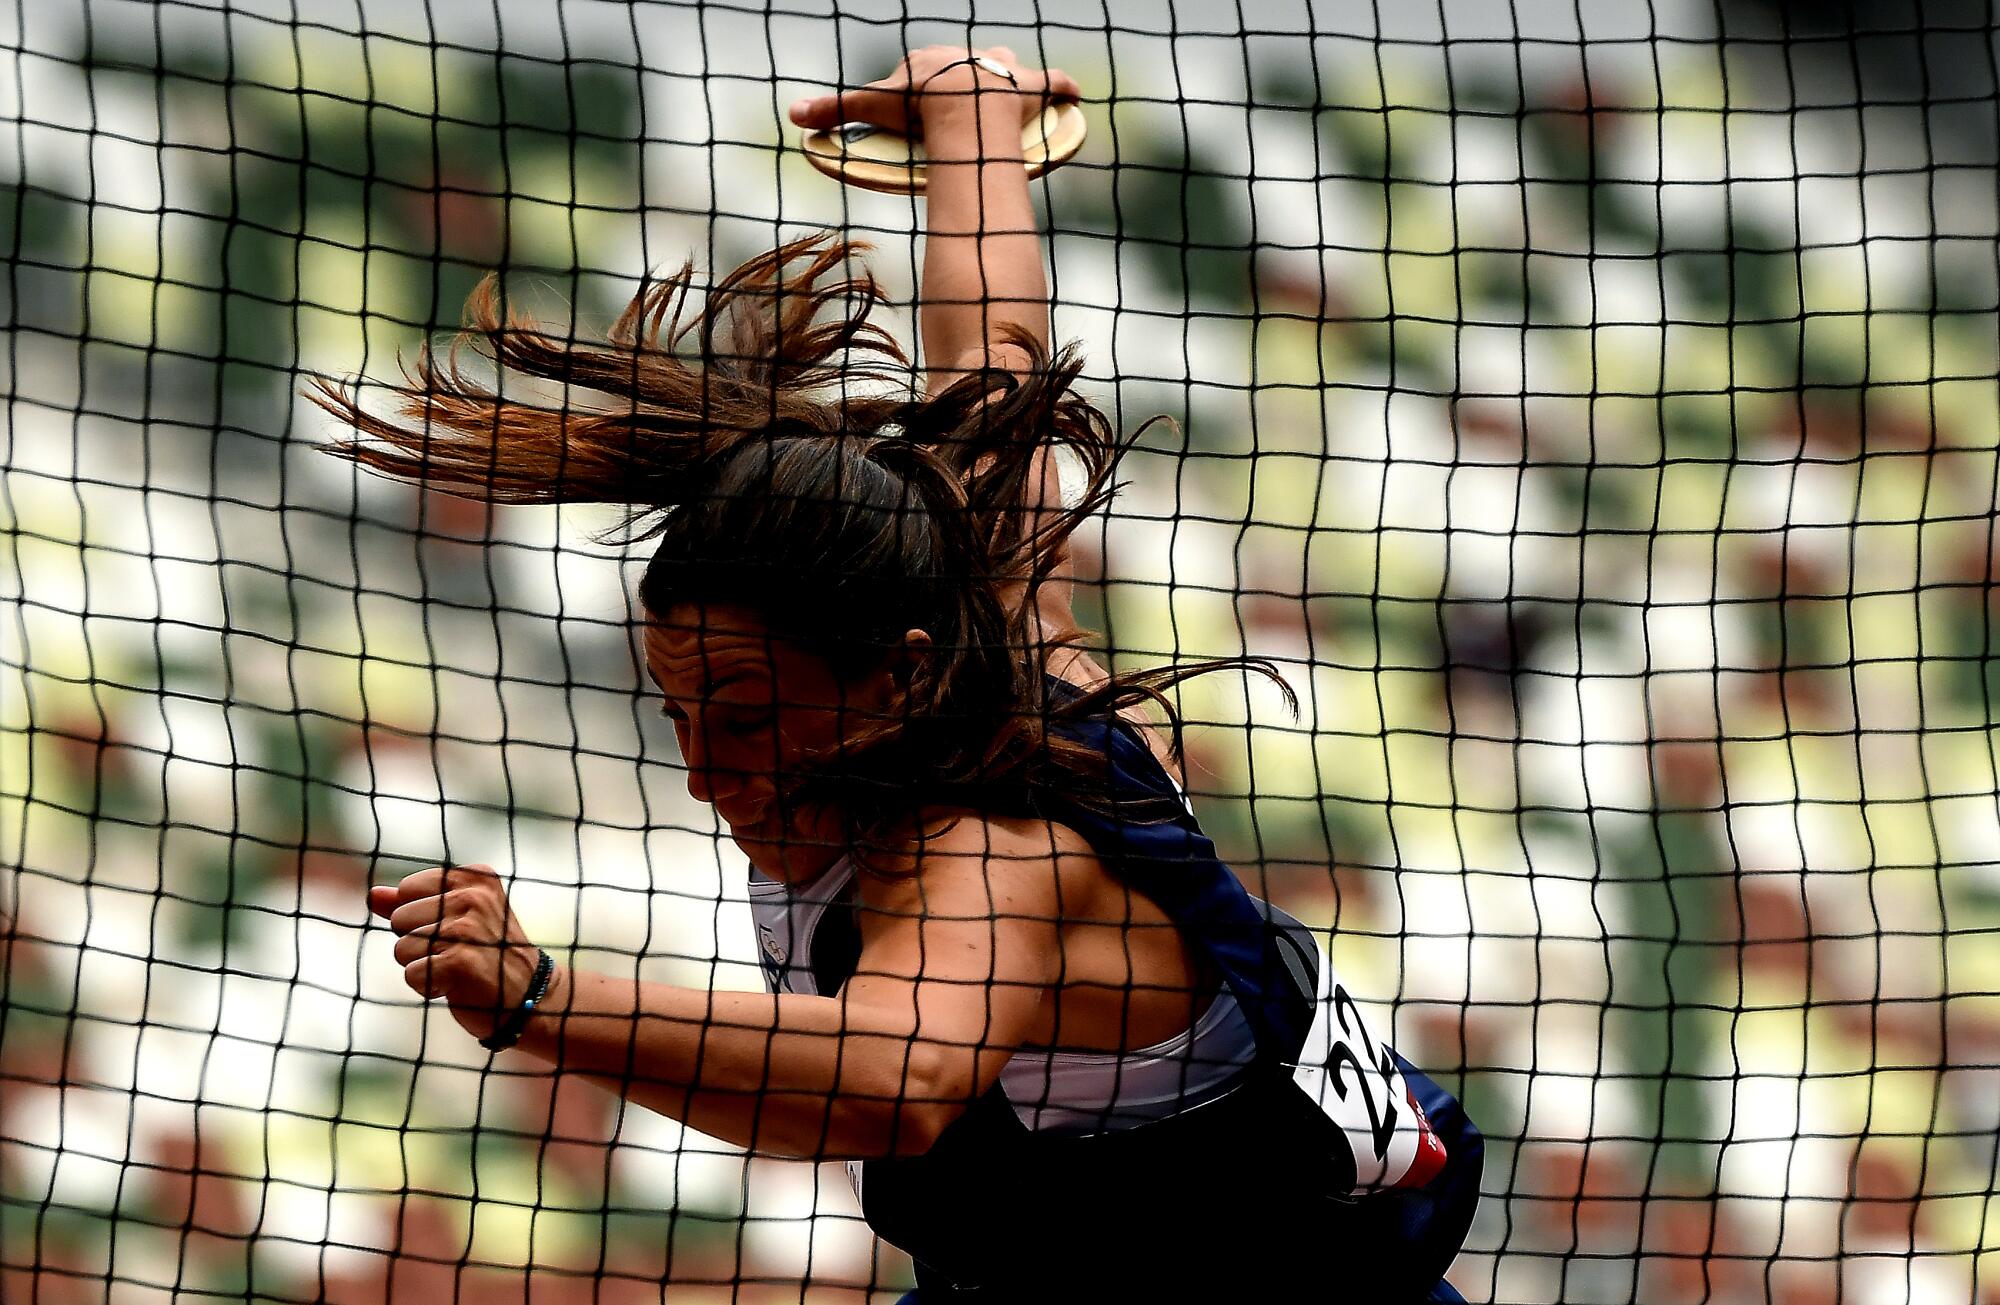 Chrysoula Anagnostopoulou of Greece makes a throw in the women's discus throw qualifying.